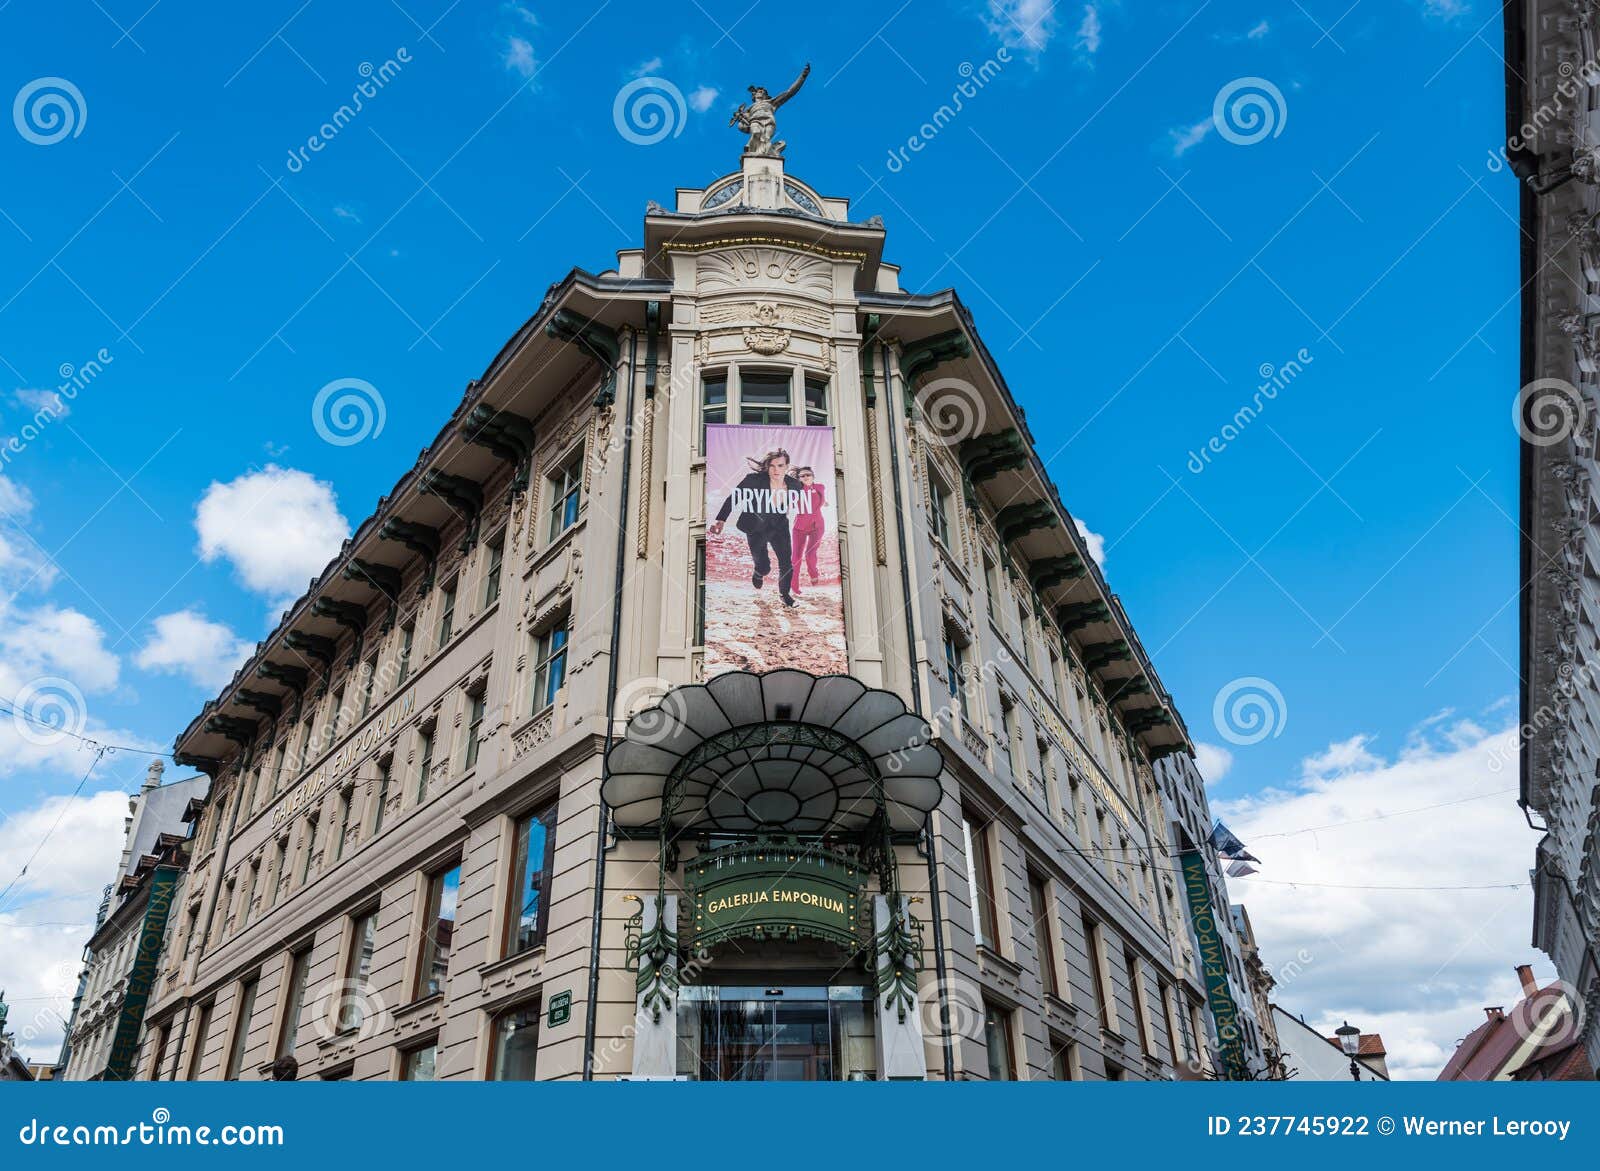 Ljubljana, Slovenia - Facade of the Emperial Gallery, a High End Fashion  Retail Shop Editorial Photography - Image of gallery, heritage: 237745922